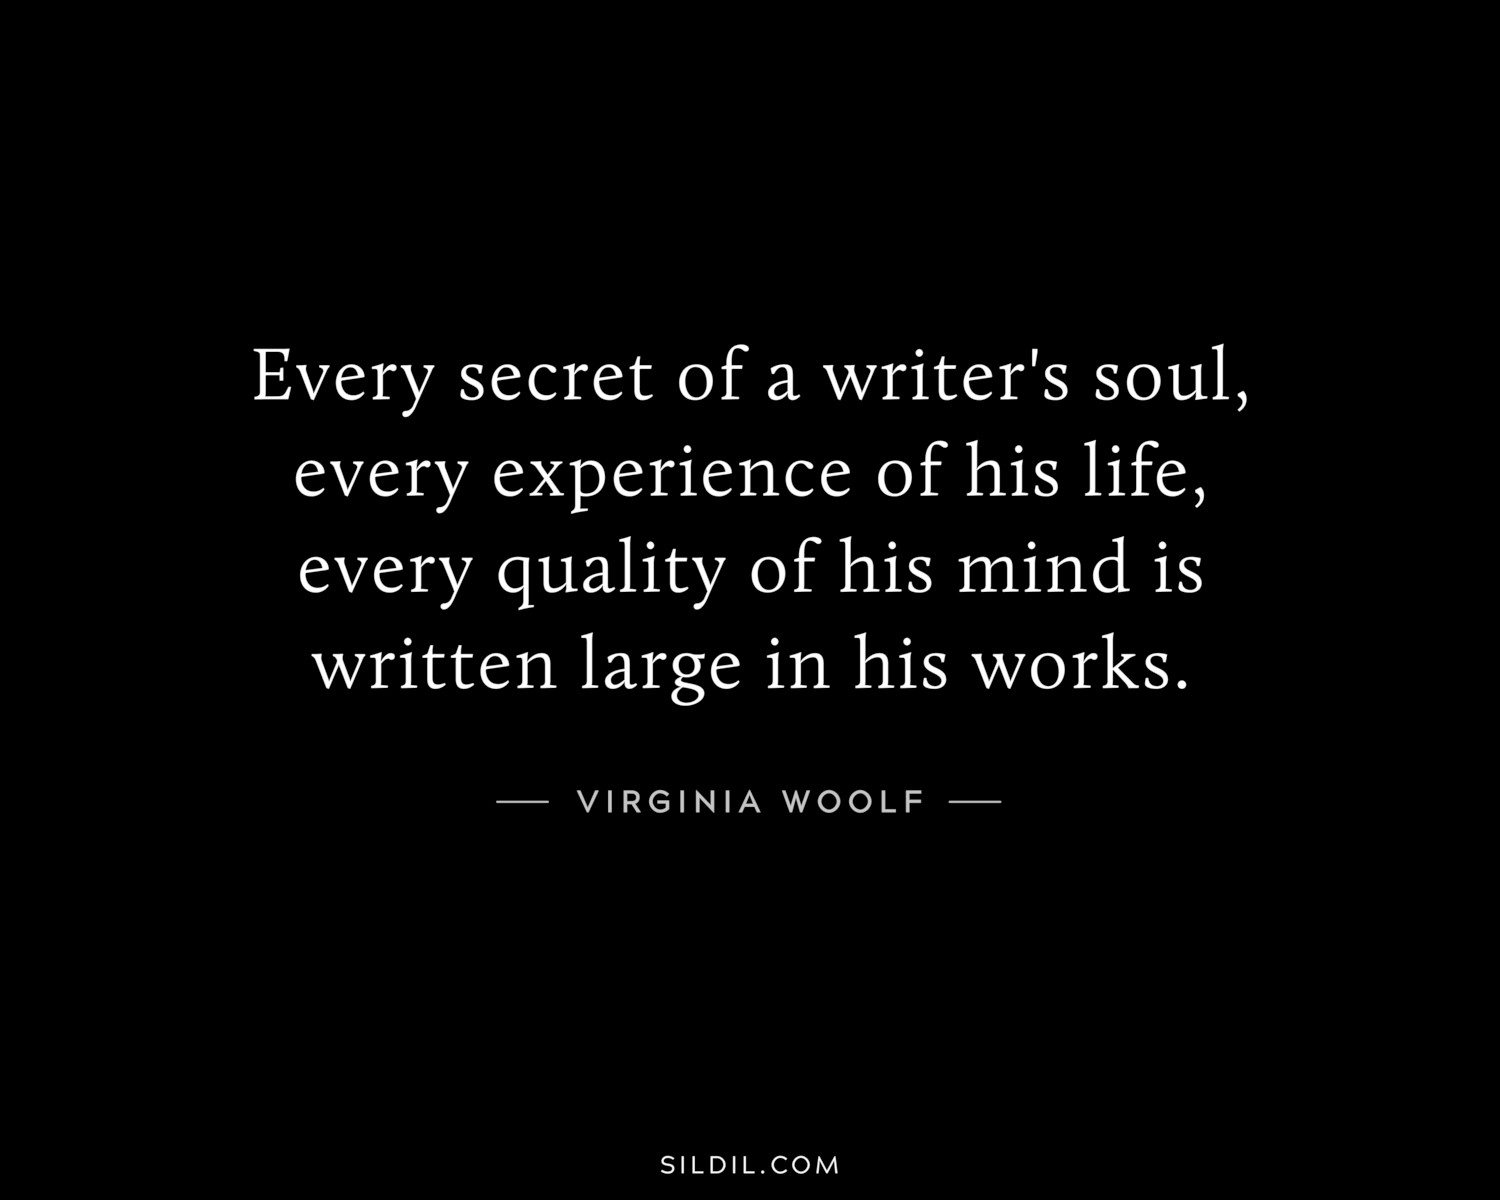 Every secret of a writer's soul, every experience of his life, every quality of his mind is written large in his works.